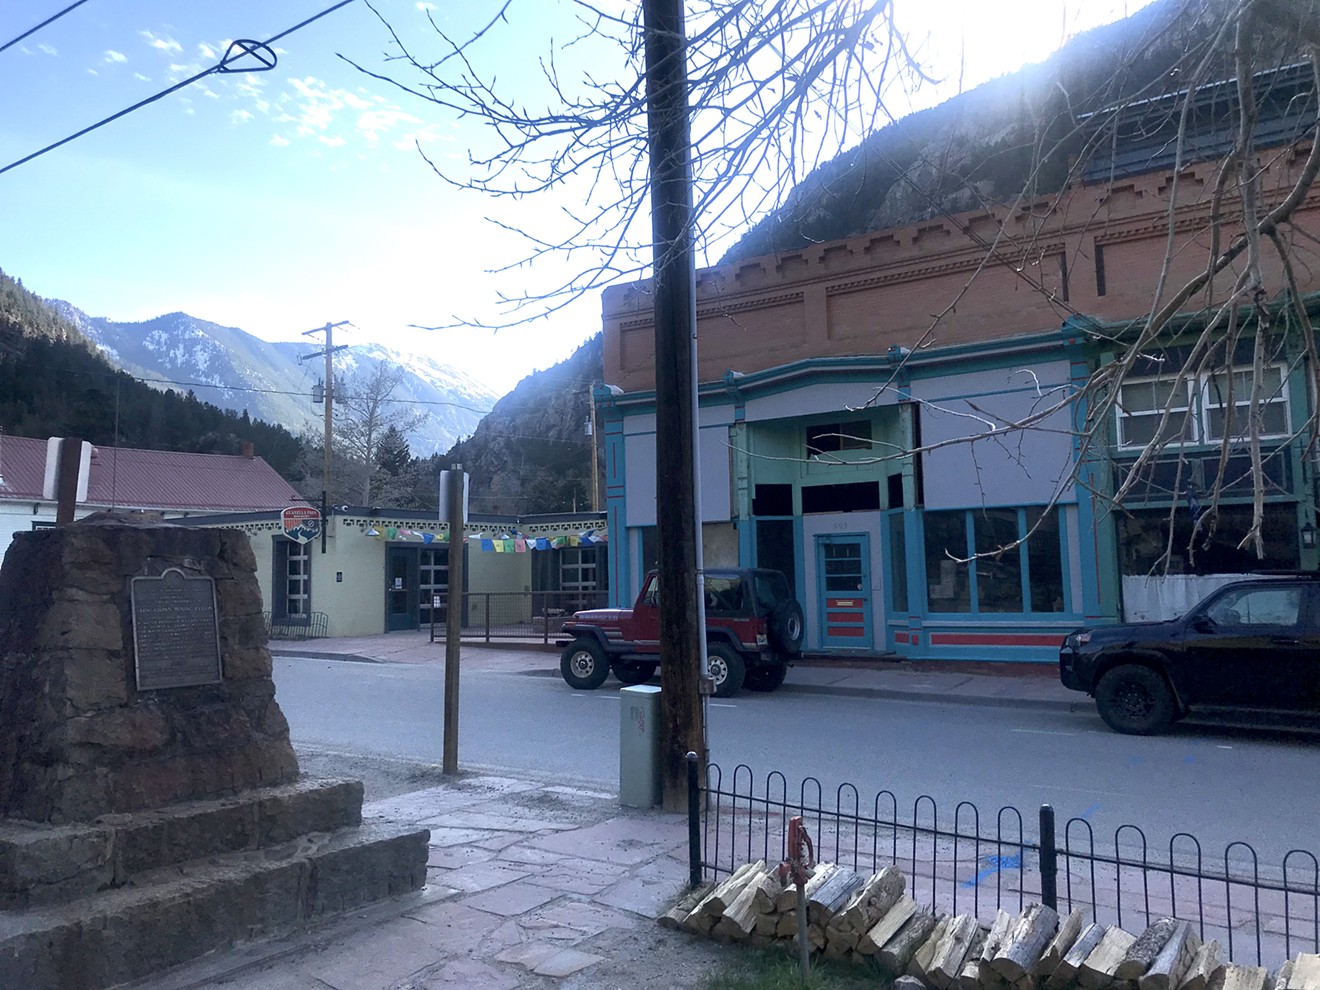 Located in scenic Georgetown, Guanella Pass Brewing (at left in yellow building) will be joined by Silverbrick (at right).